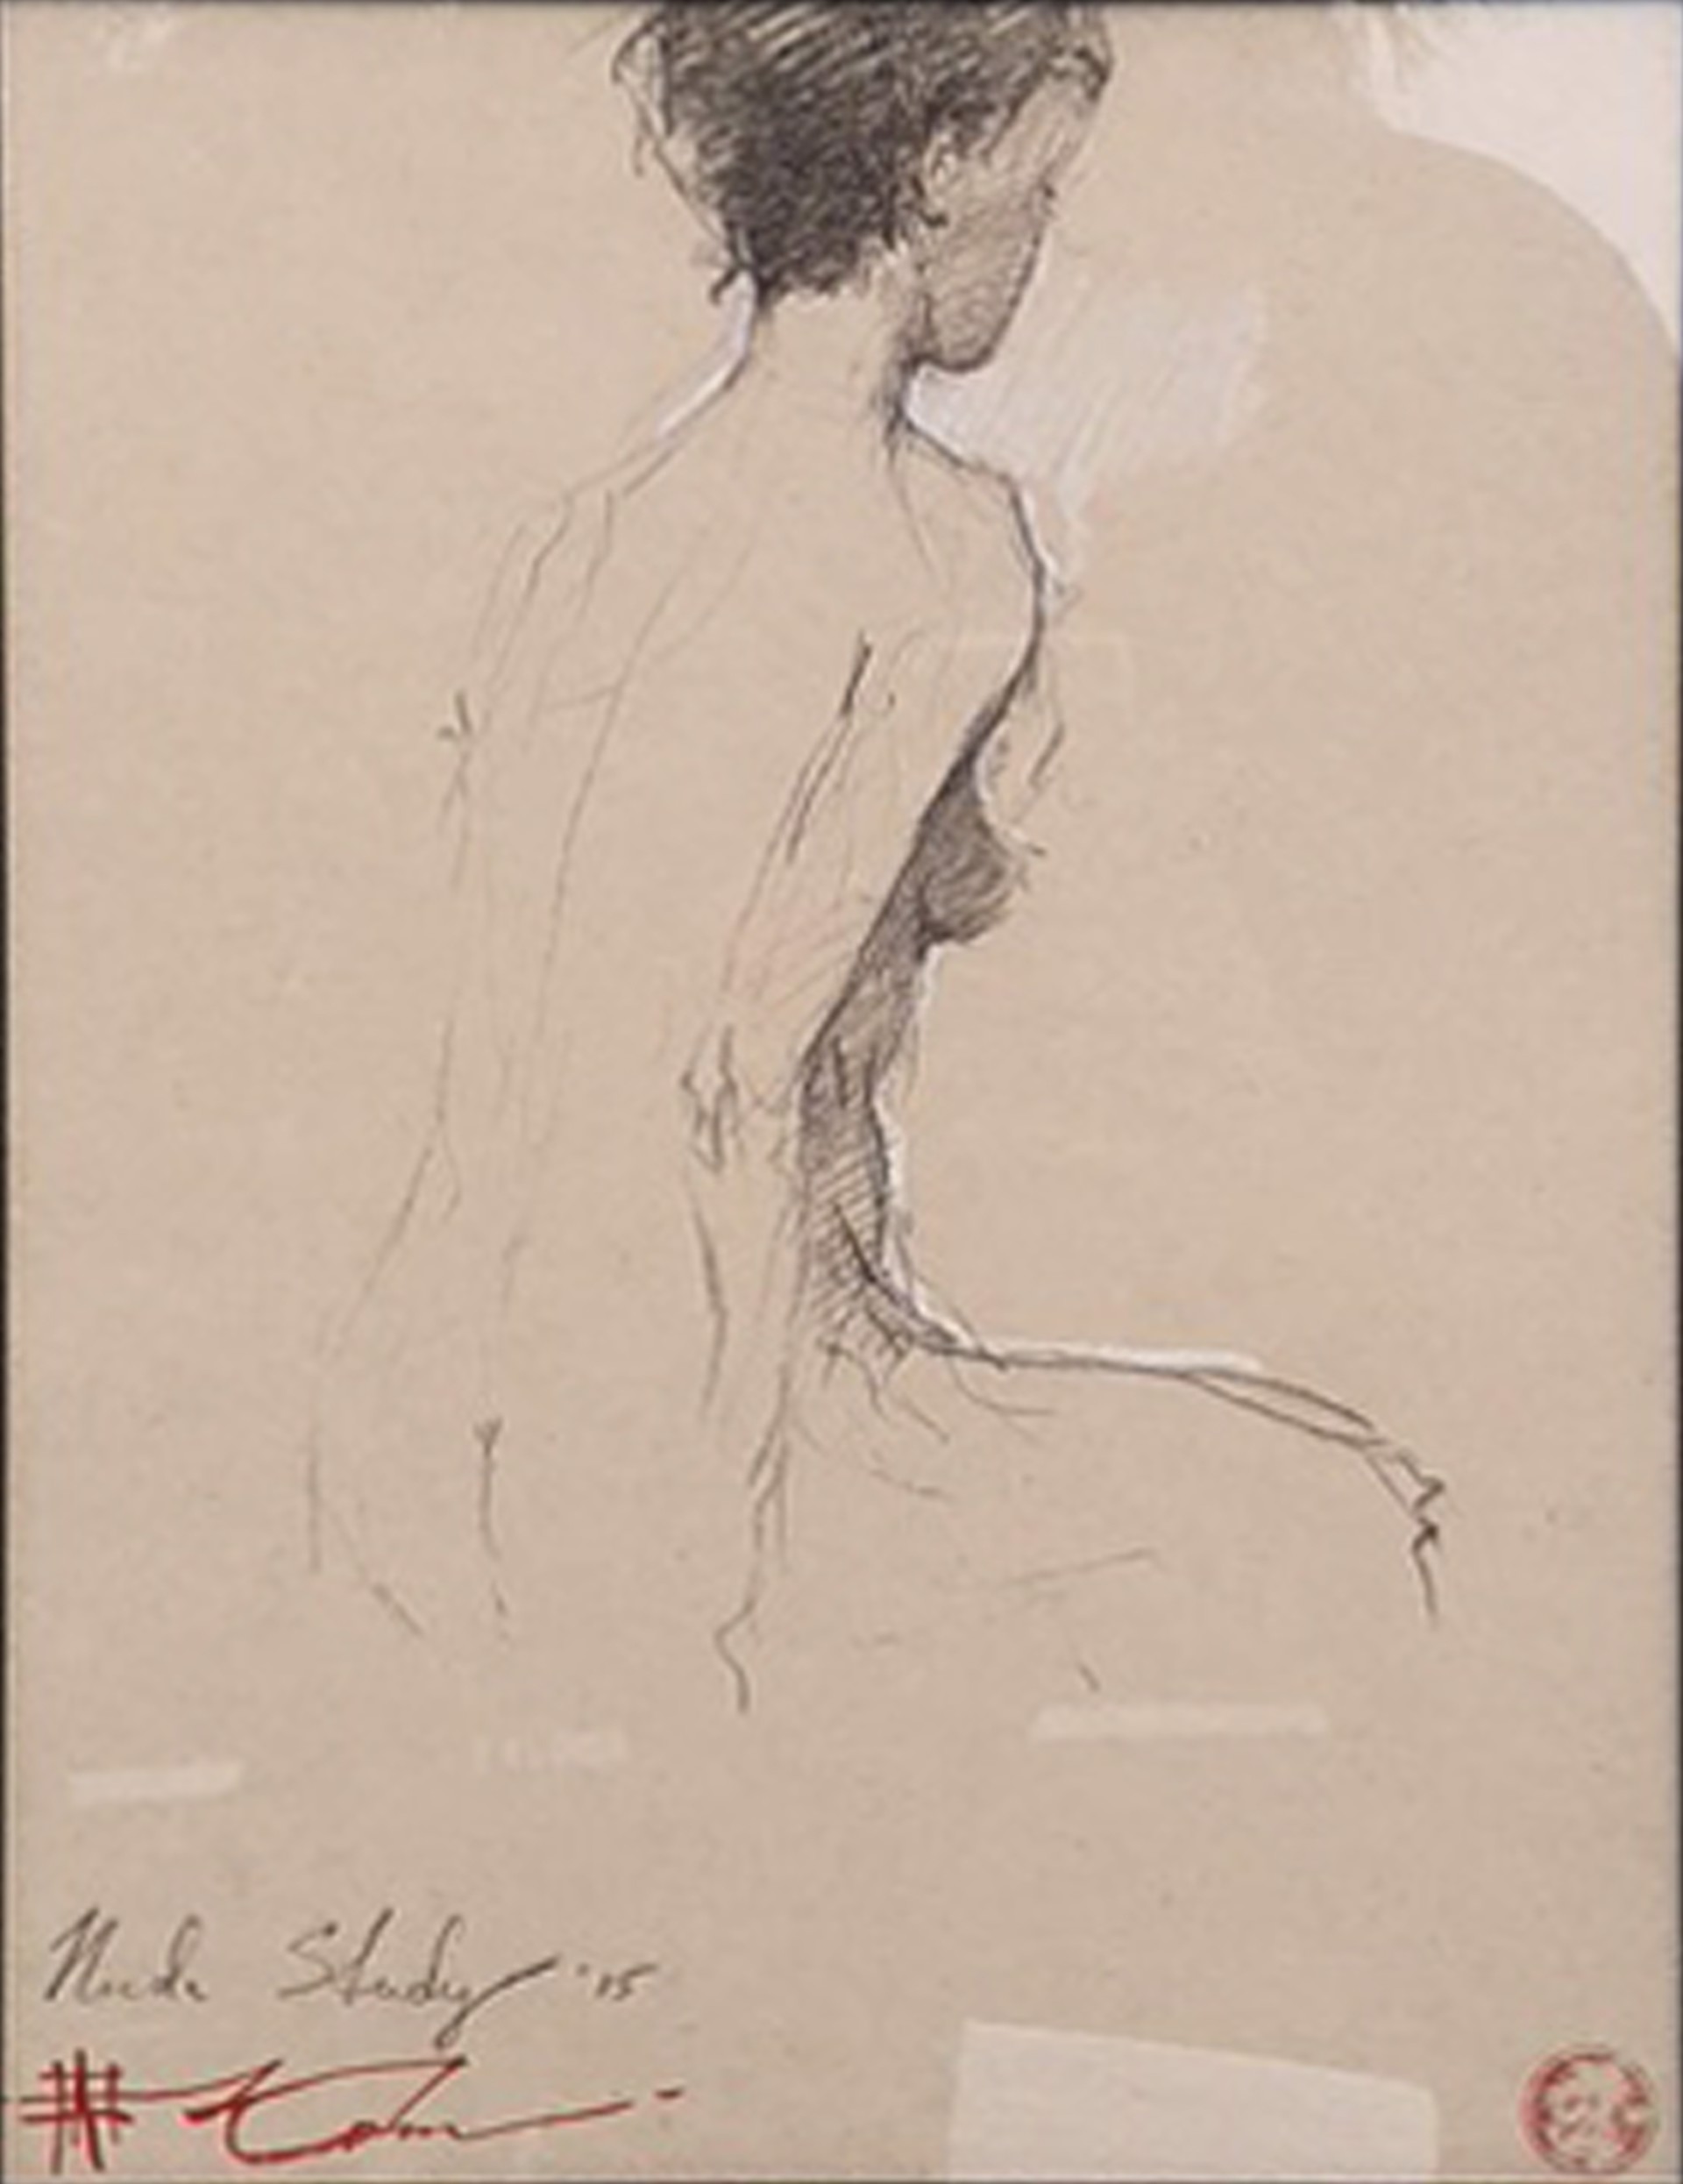 "Nude Study" #15 by Andre Kohn